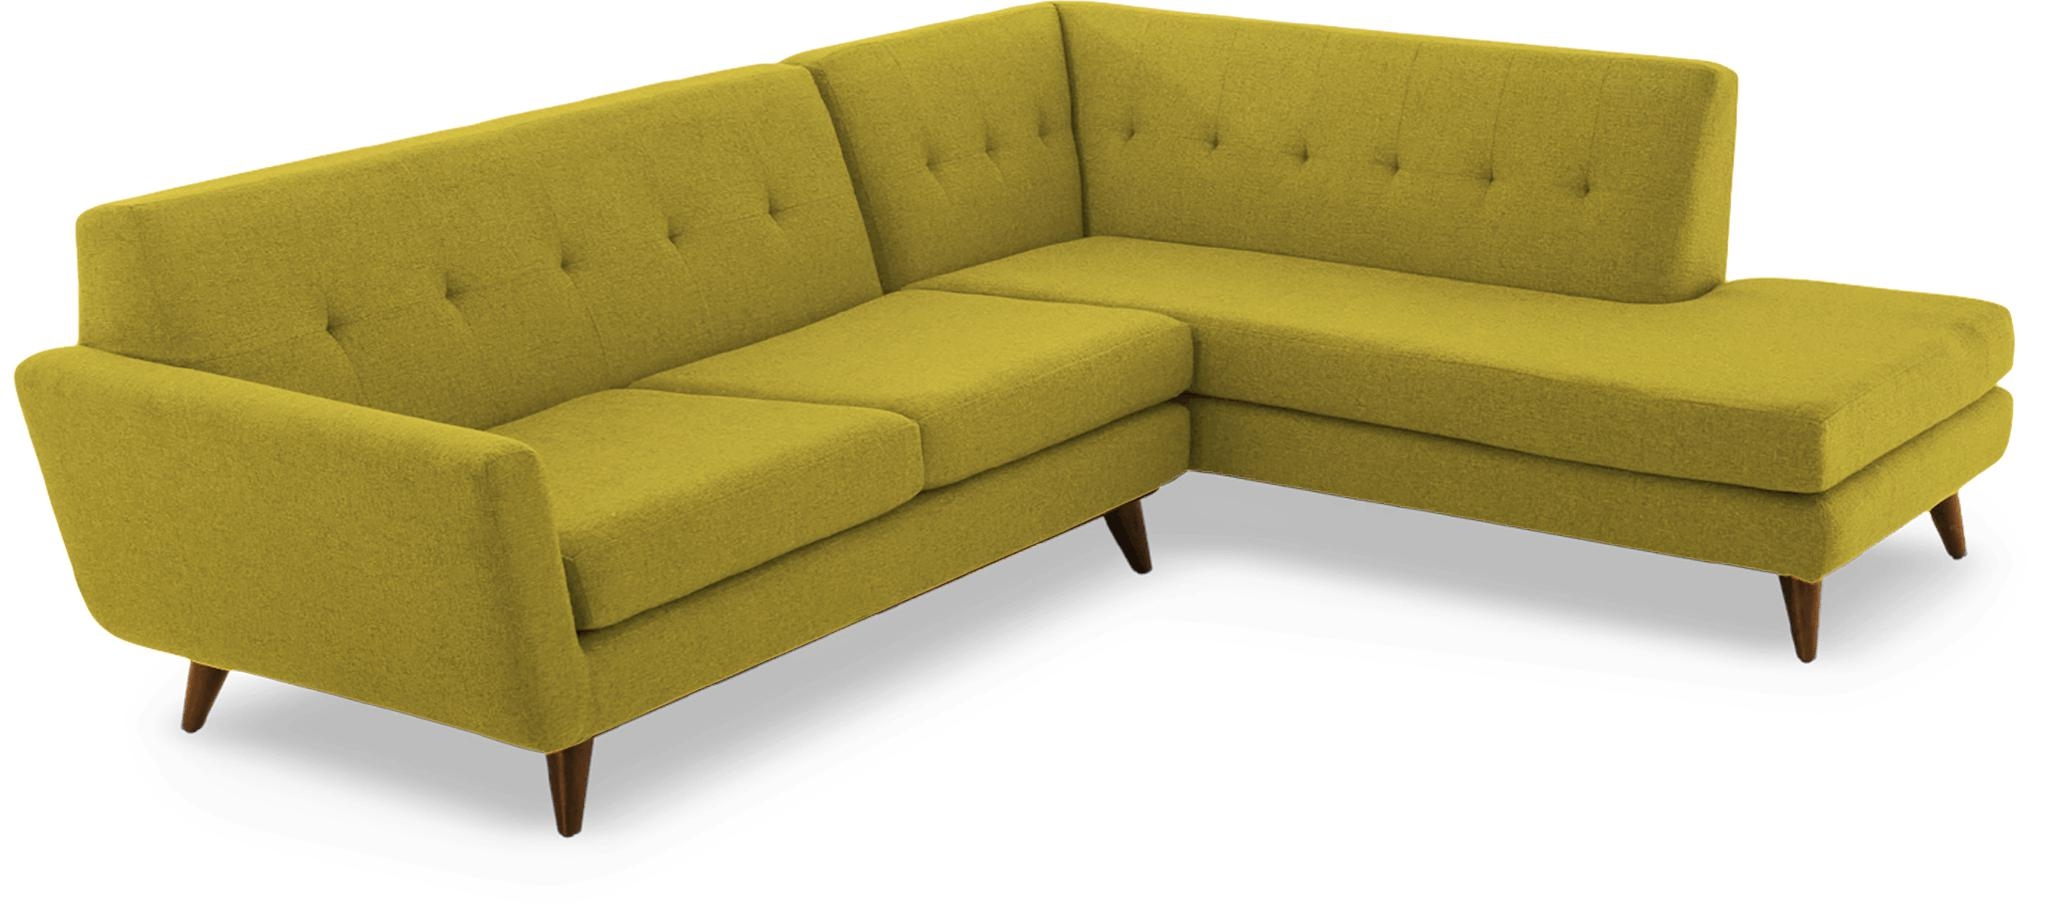 Yellow Hughes Mid Century Modern Sectional with Bumper - Bloke Goldenrod - Mocha - Right  - Image 1